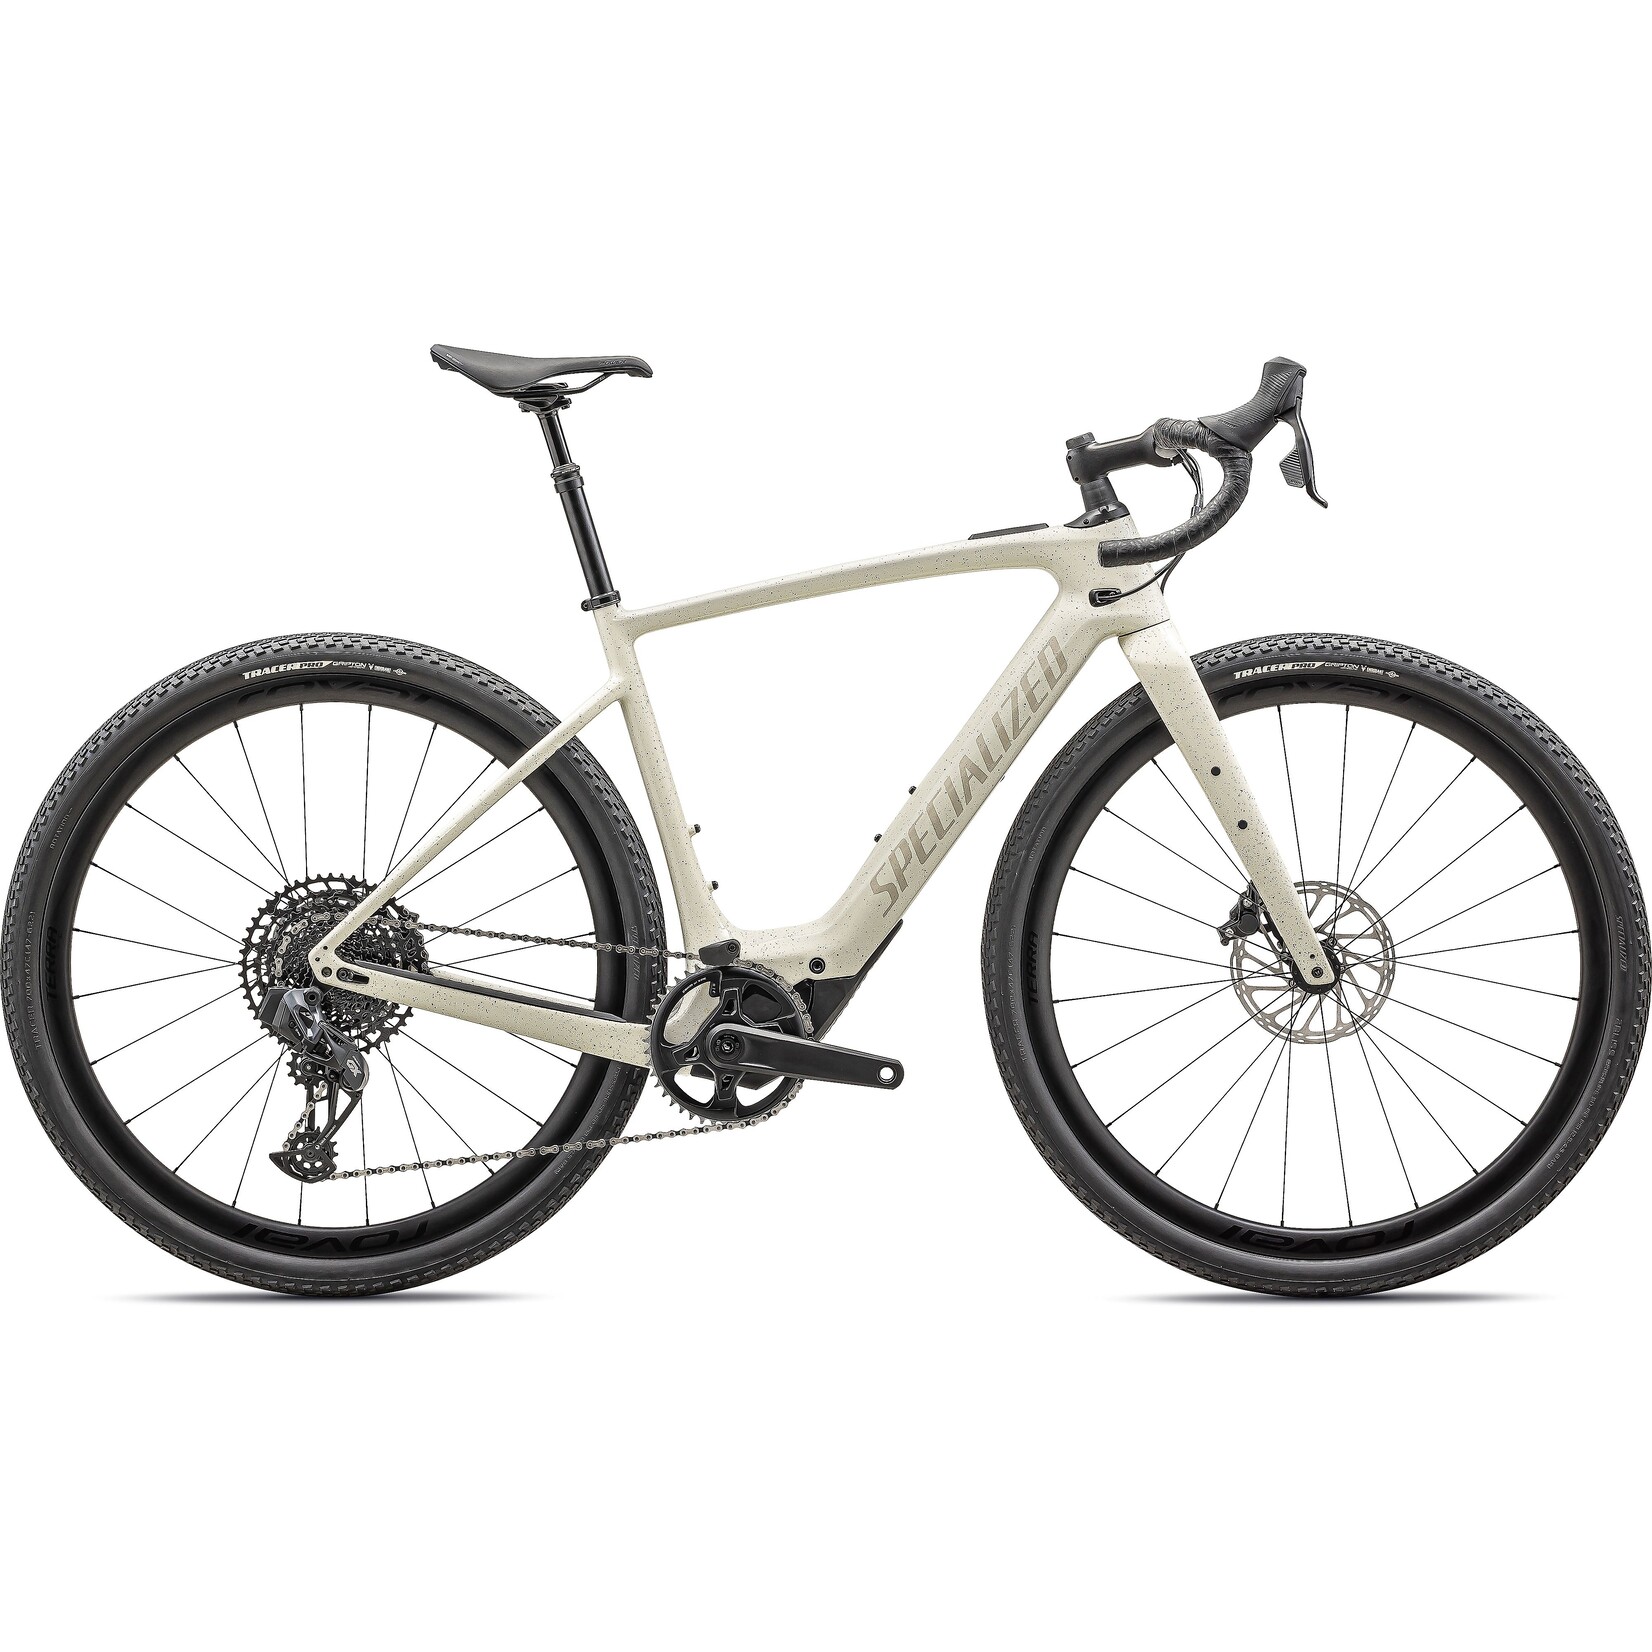 Specialized Creo 2 Expert in BLACK PEARL BIRCH BLACK PEARL SPECKLE